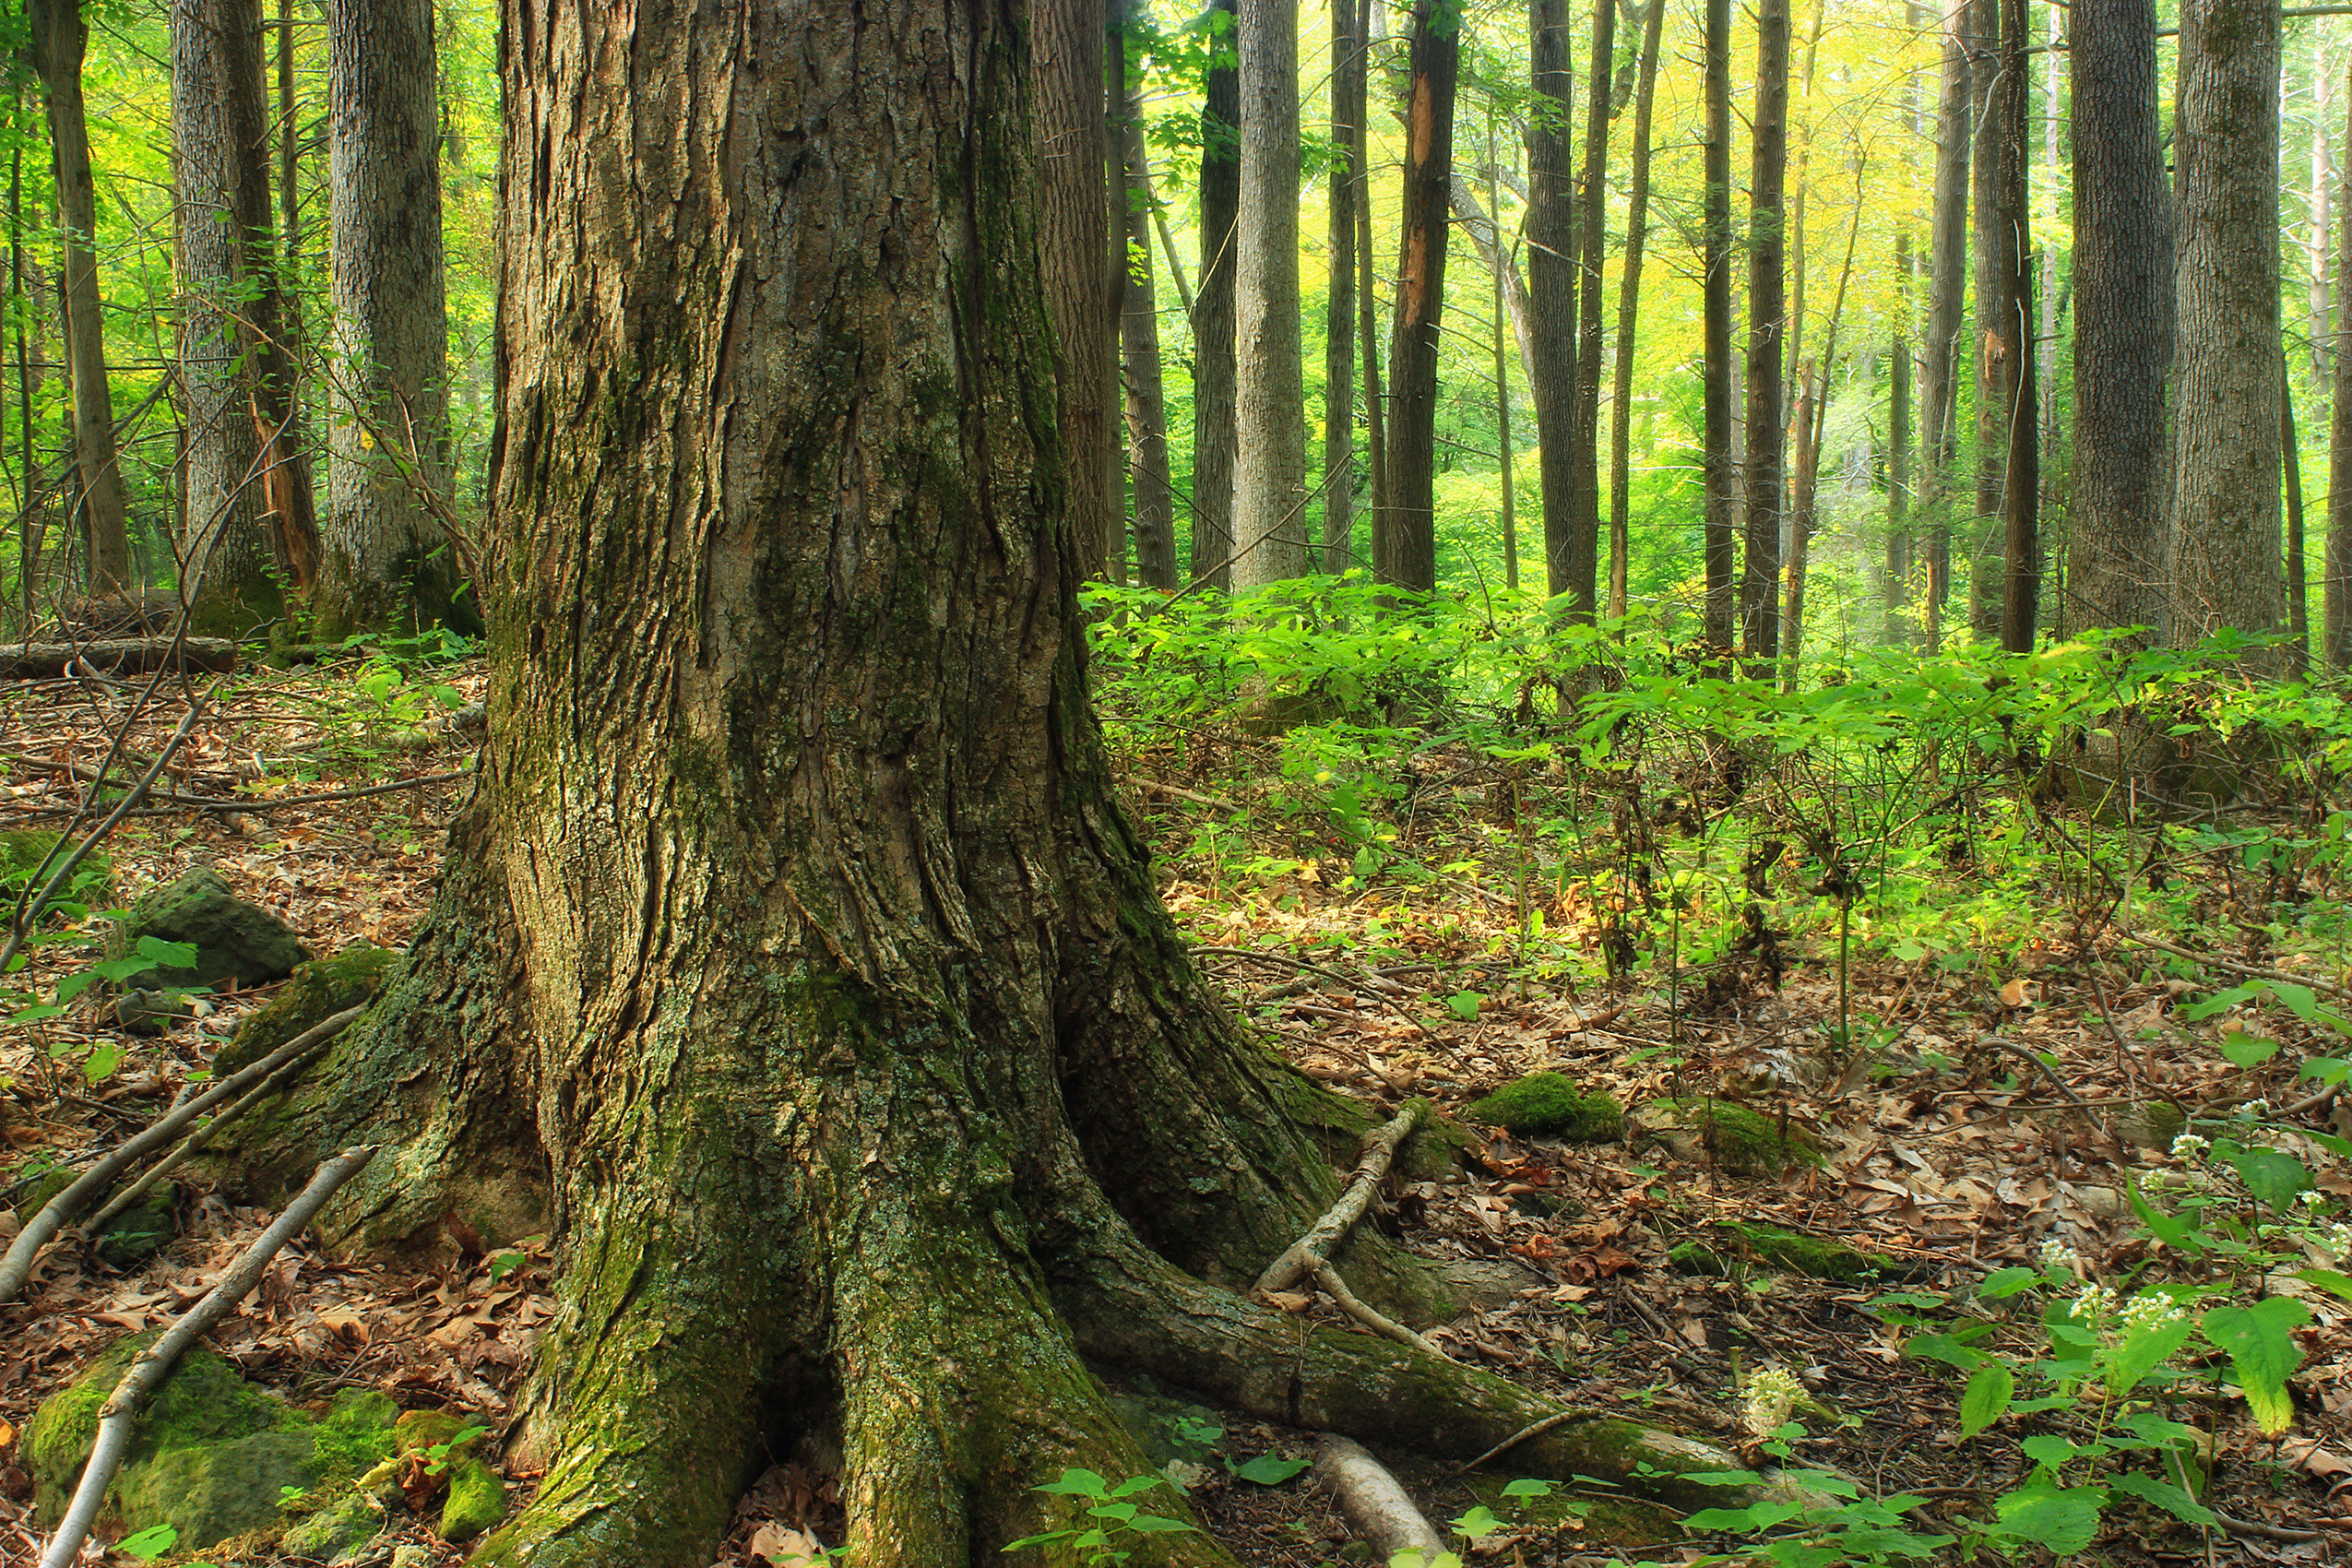 Image of a forest with green leaves of understory plants carpeting the ground between large tree trunks